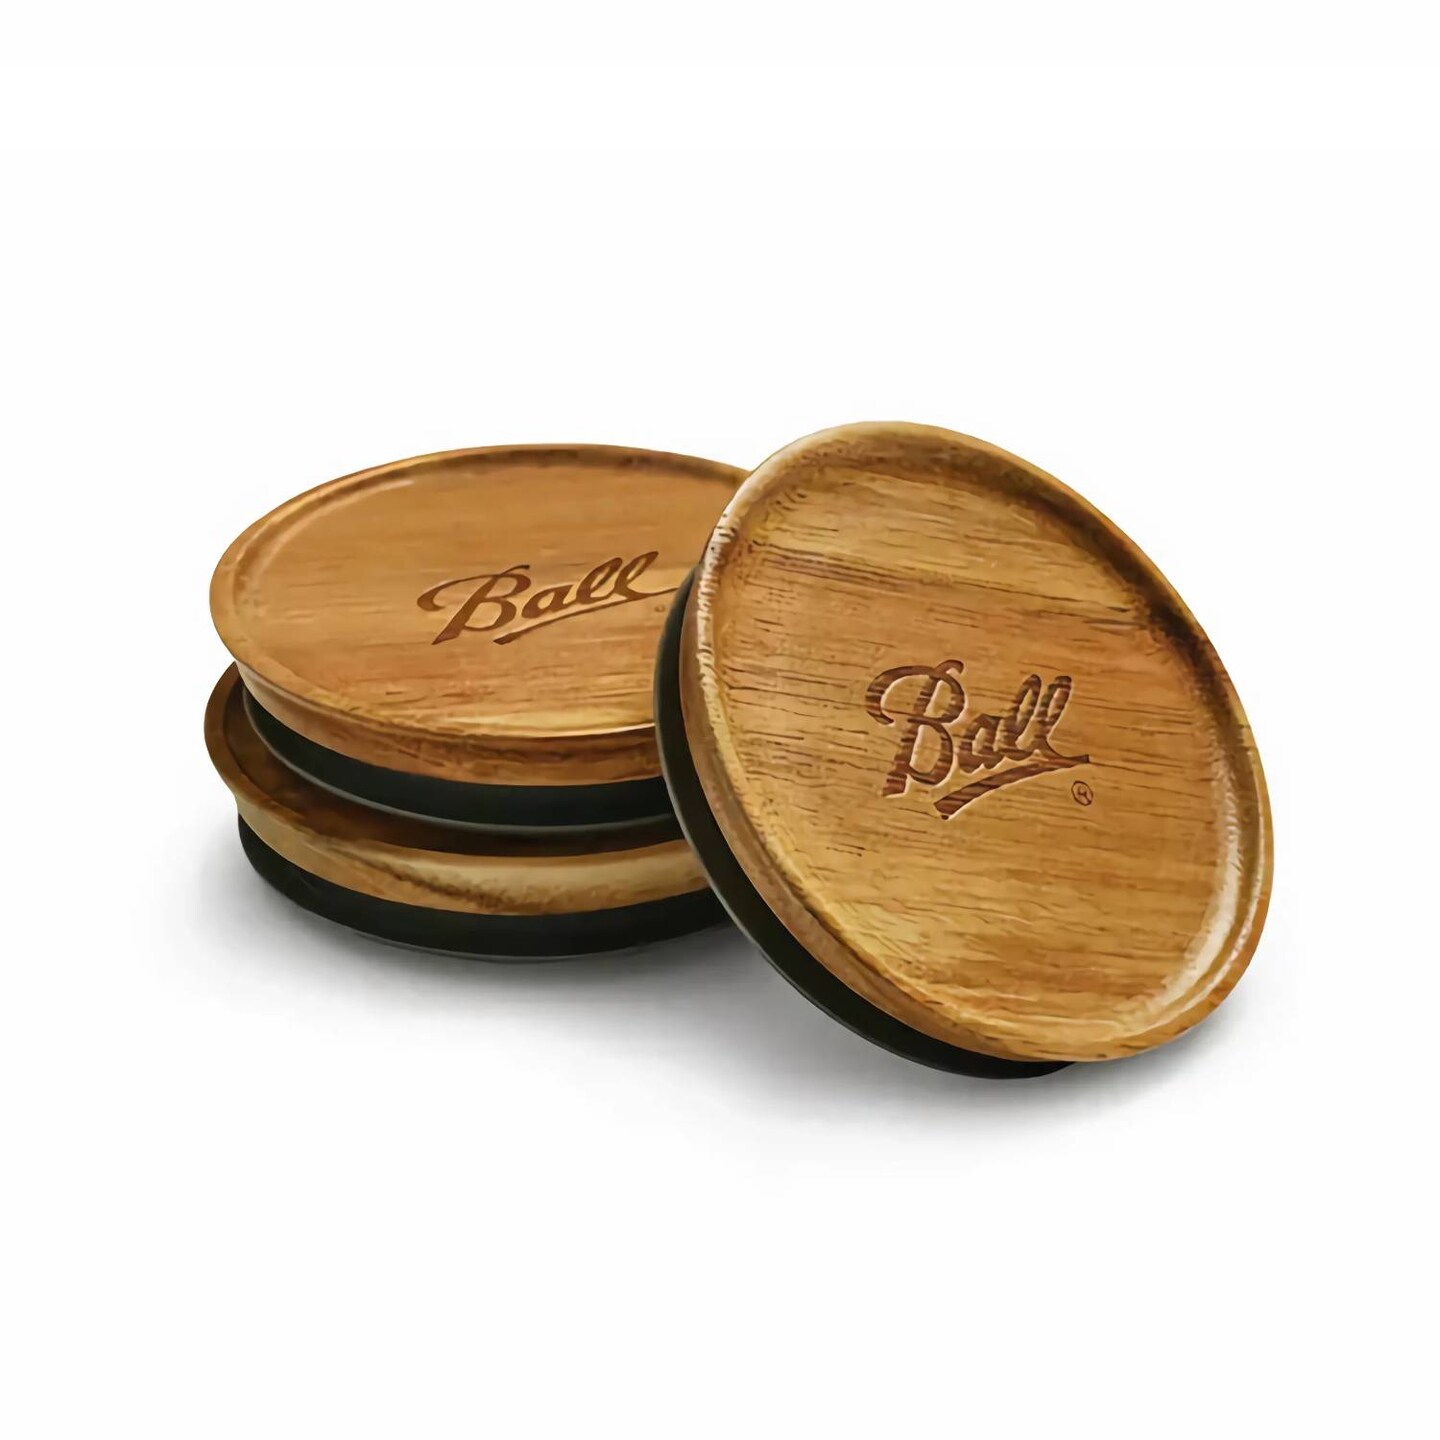 Ball Reusable Mason Jar Lids, Acacia Wood Storage Lids with Silicone Gaskets for an Airtight Seal, Wide Mouth, One Pack of 3